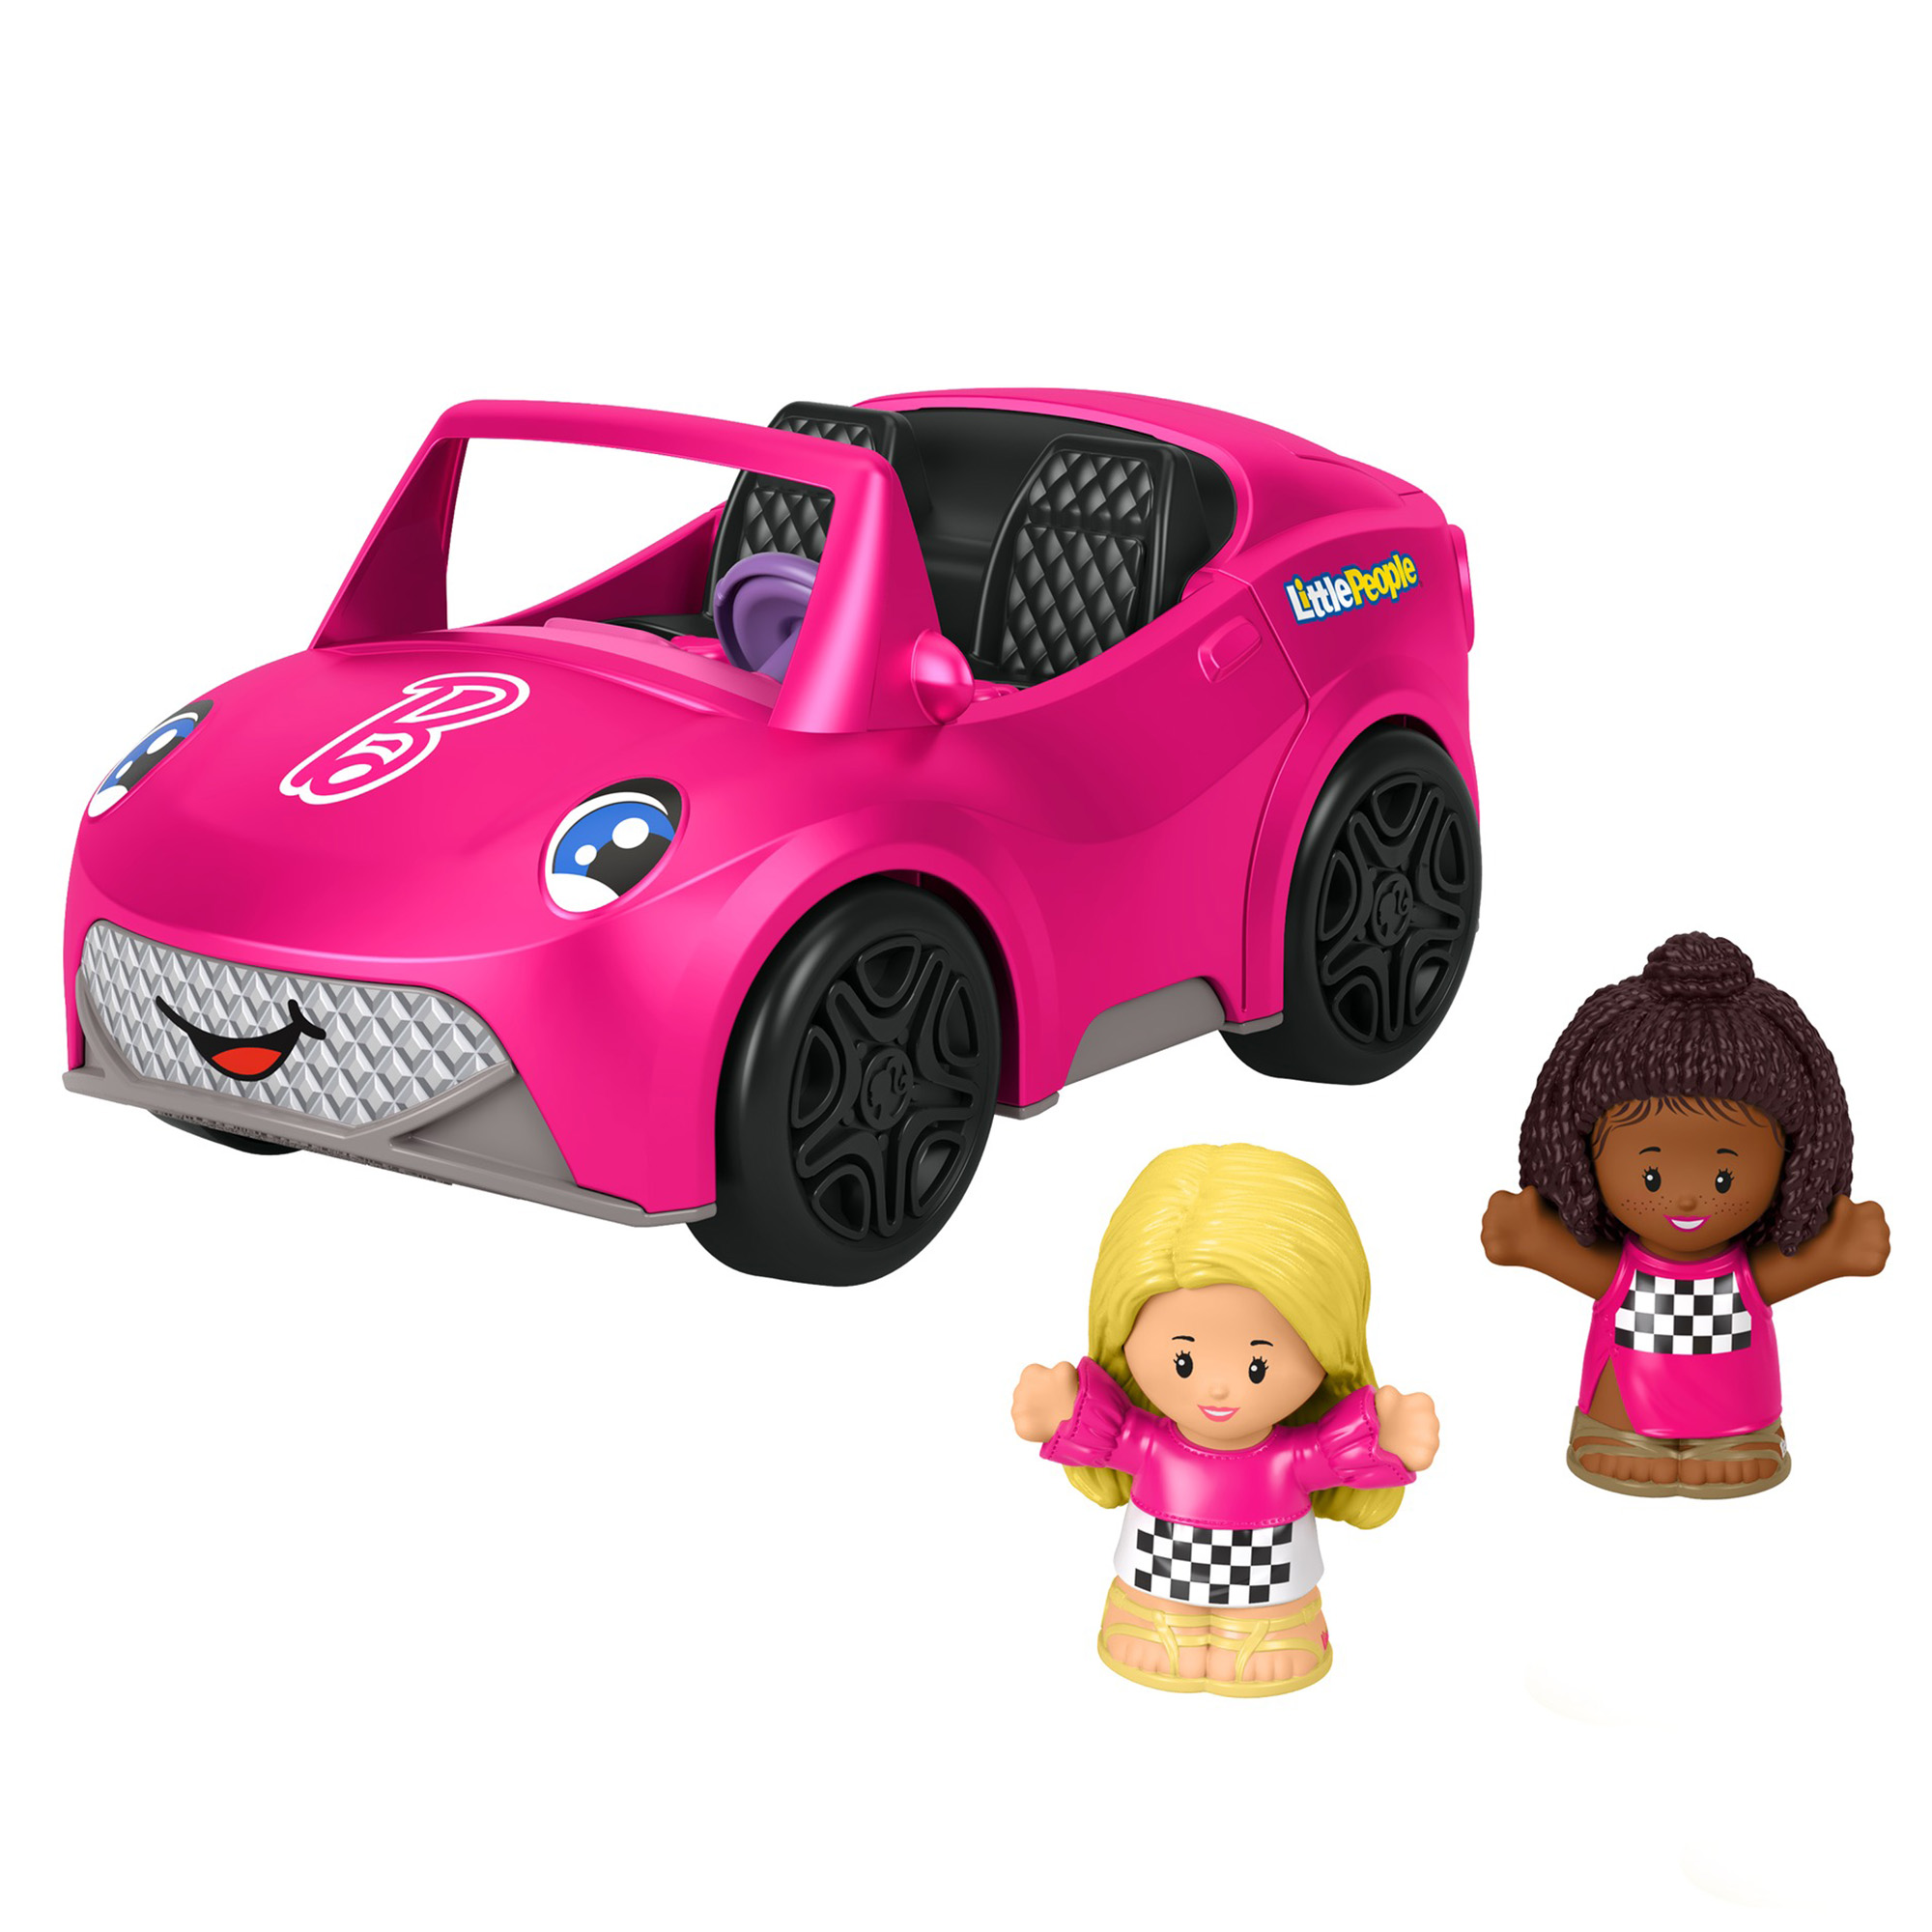 Fisher-Price Little People Barbie Convertible and 2 Figures at Toys R Us UK